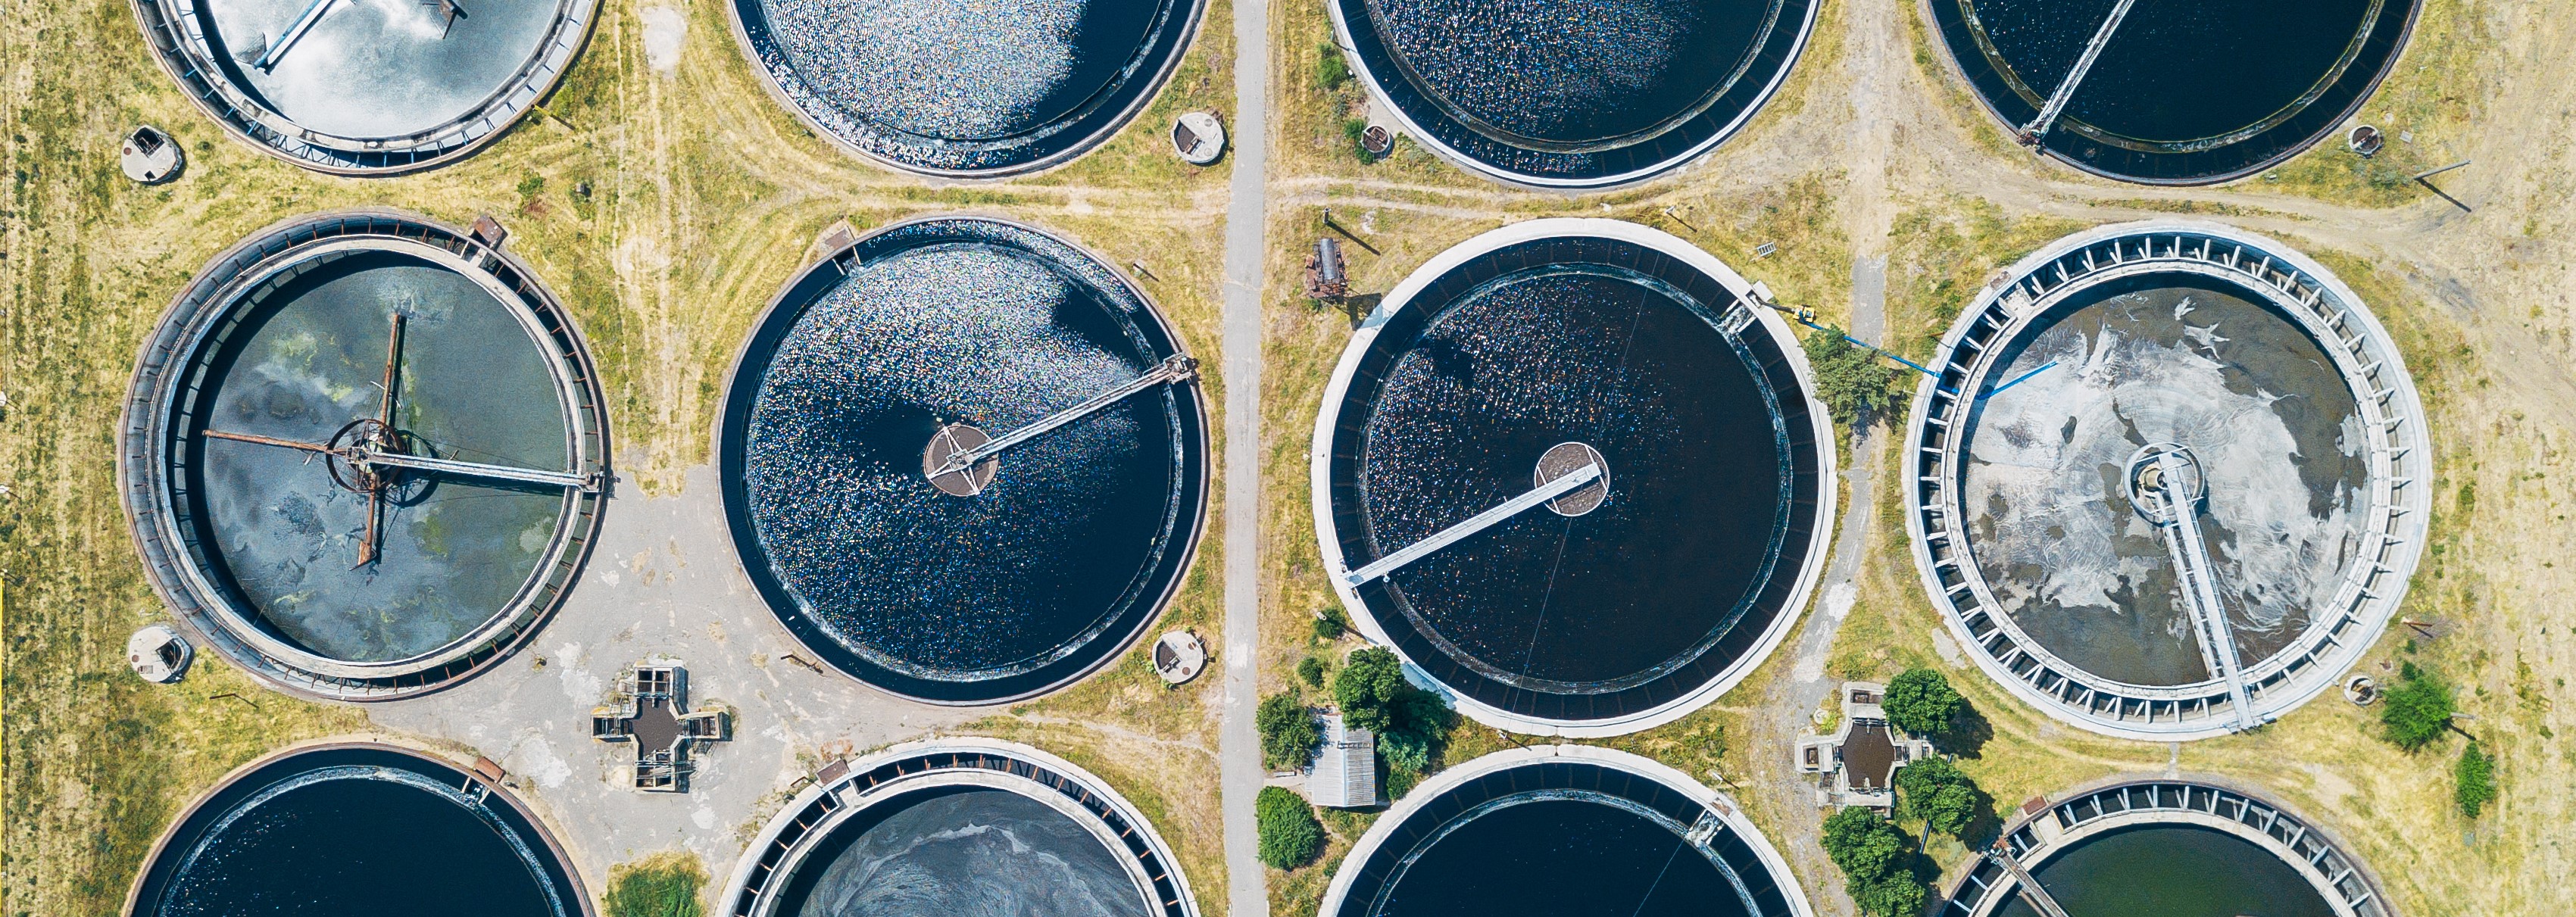 Overhead view of circular tanks at a wastewater treatment plant